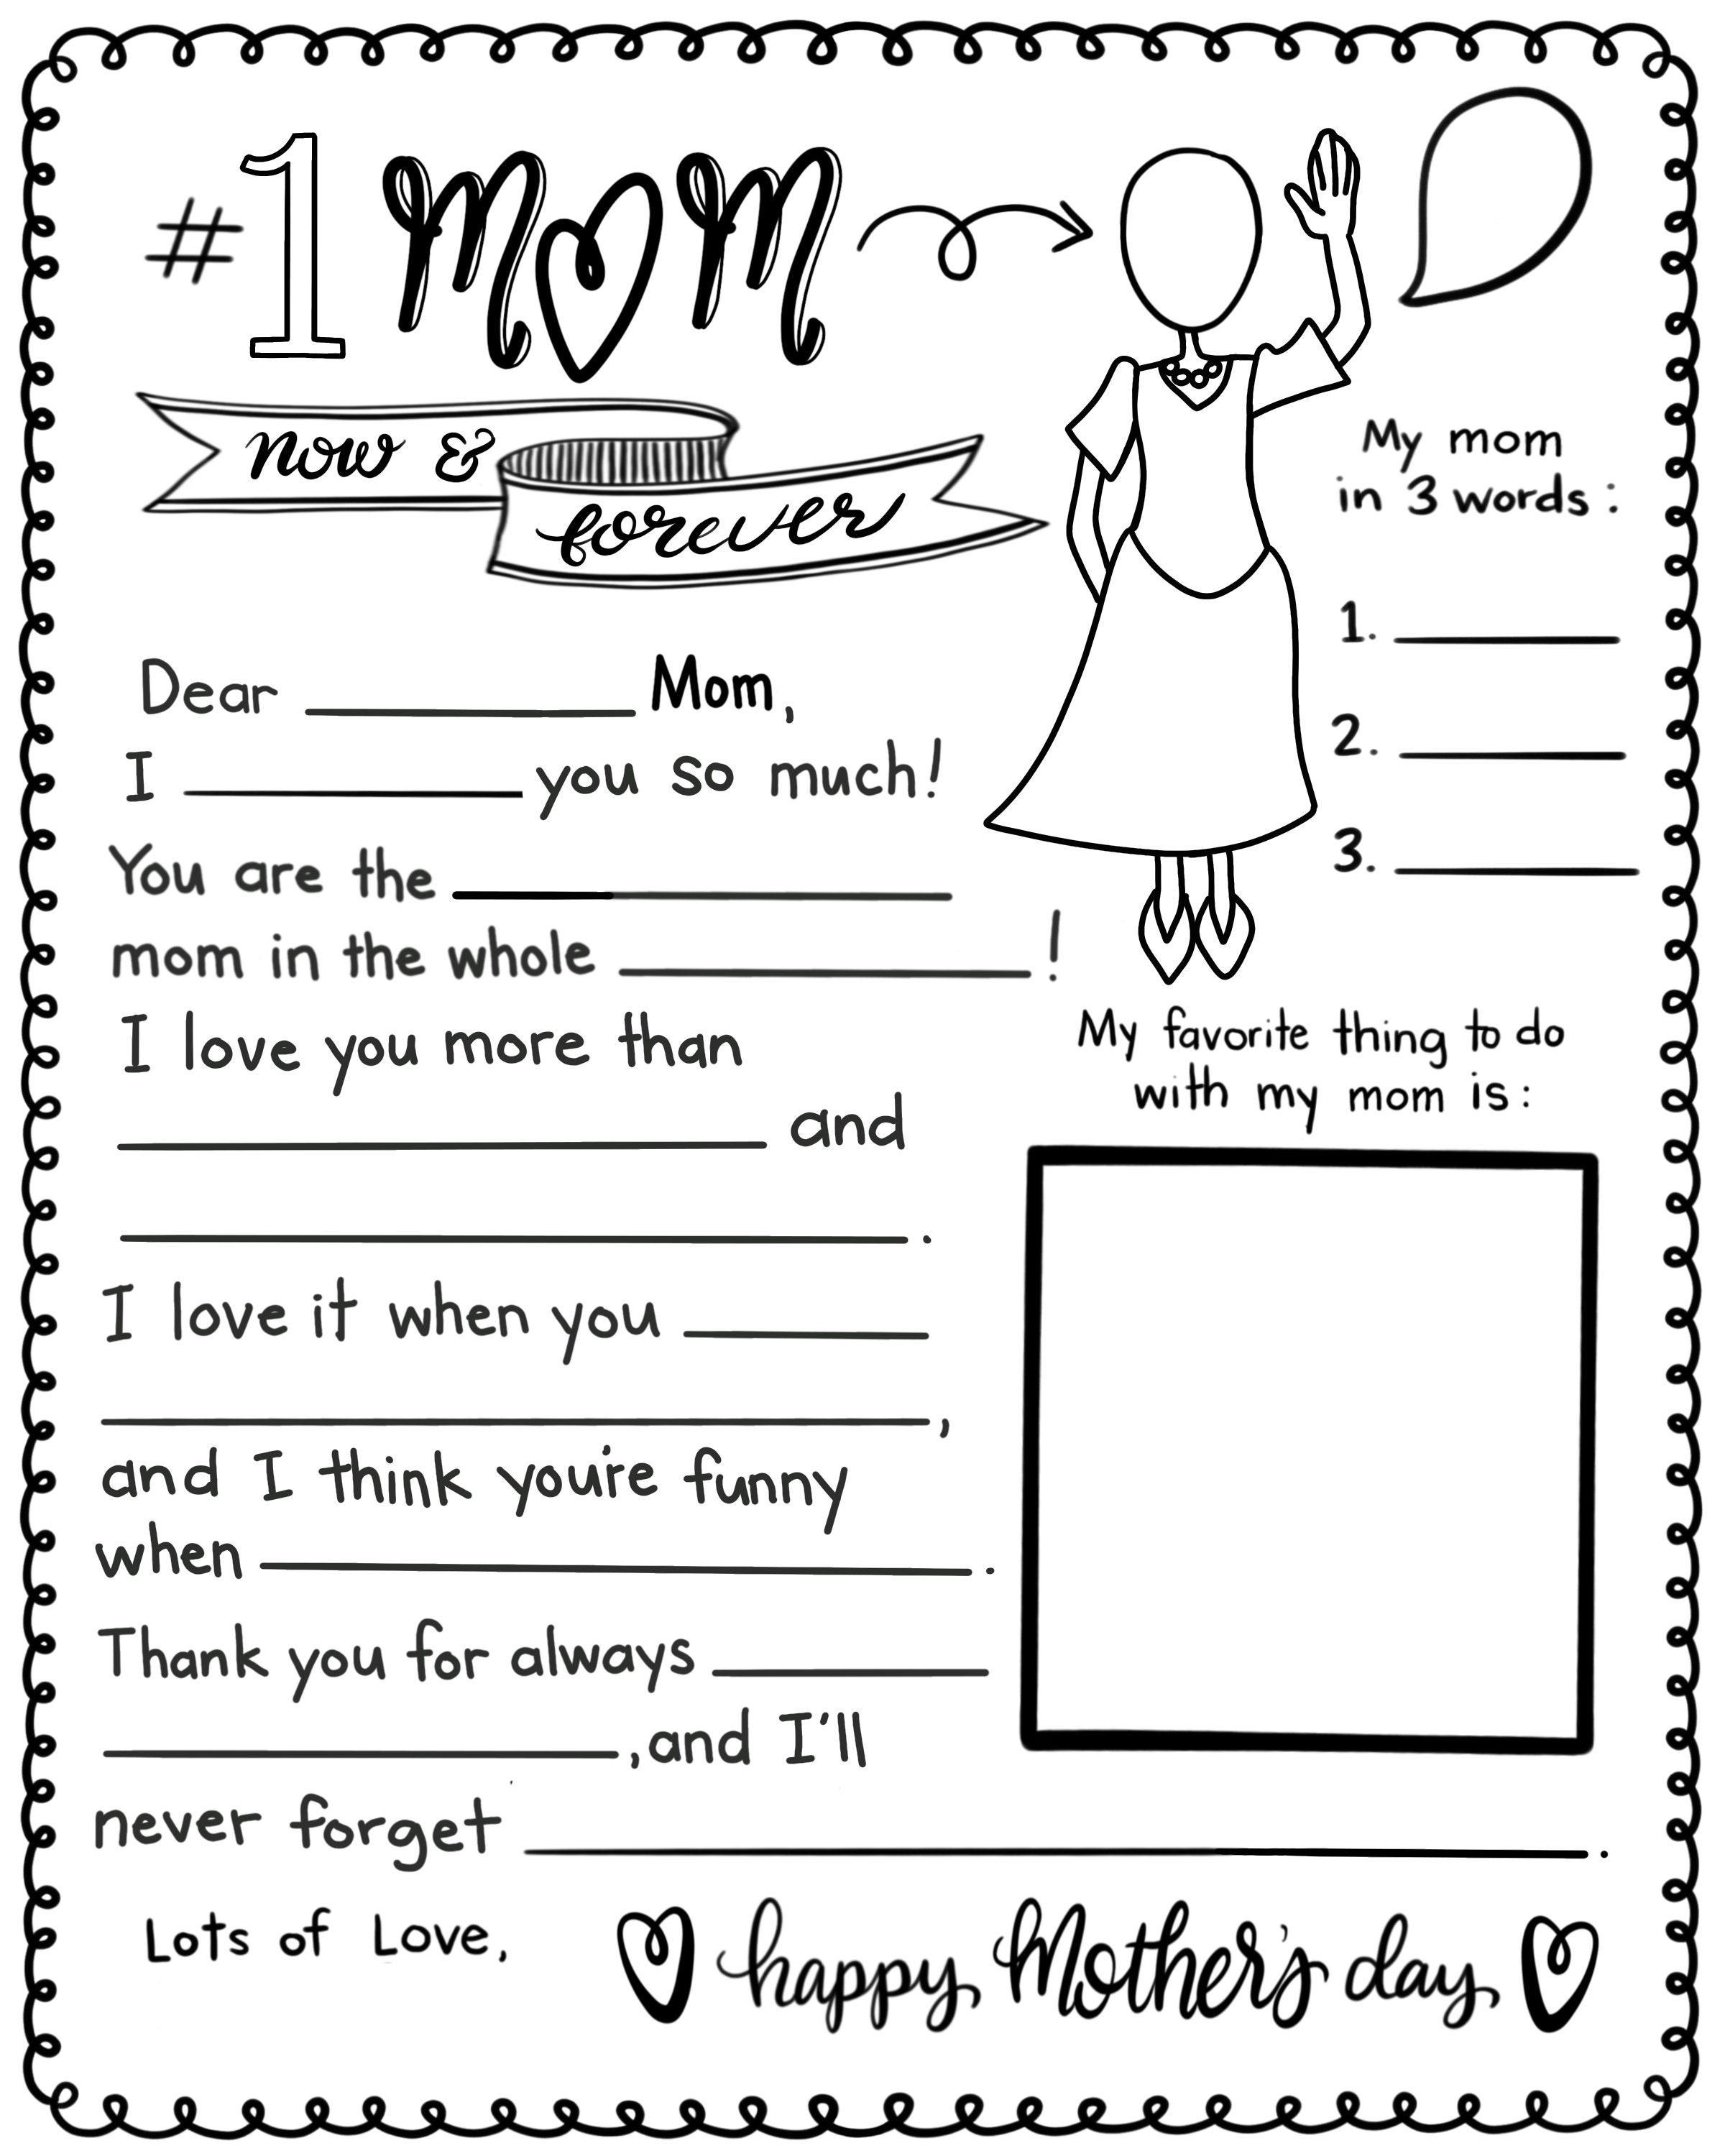 mother's day letter essay